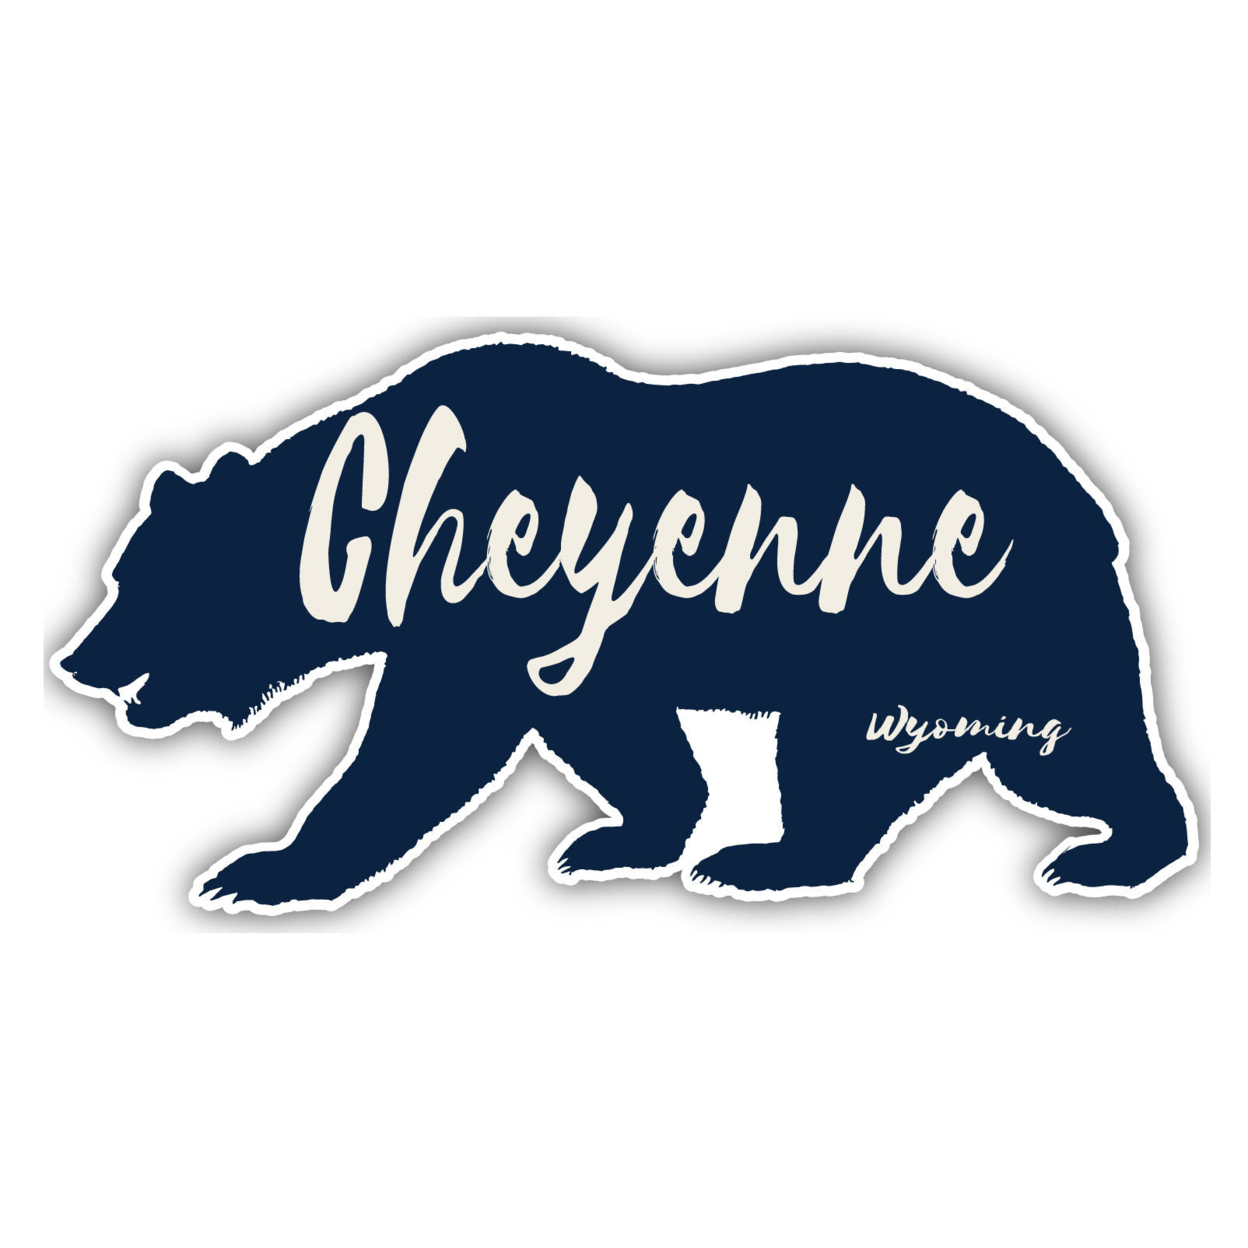 Cheyenne Wyoming Souvenir Decorative Stickers (Choose Theme And Size) - 4-Pack, 6-Inch, Tent